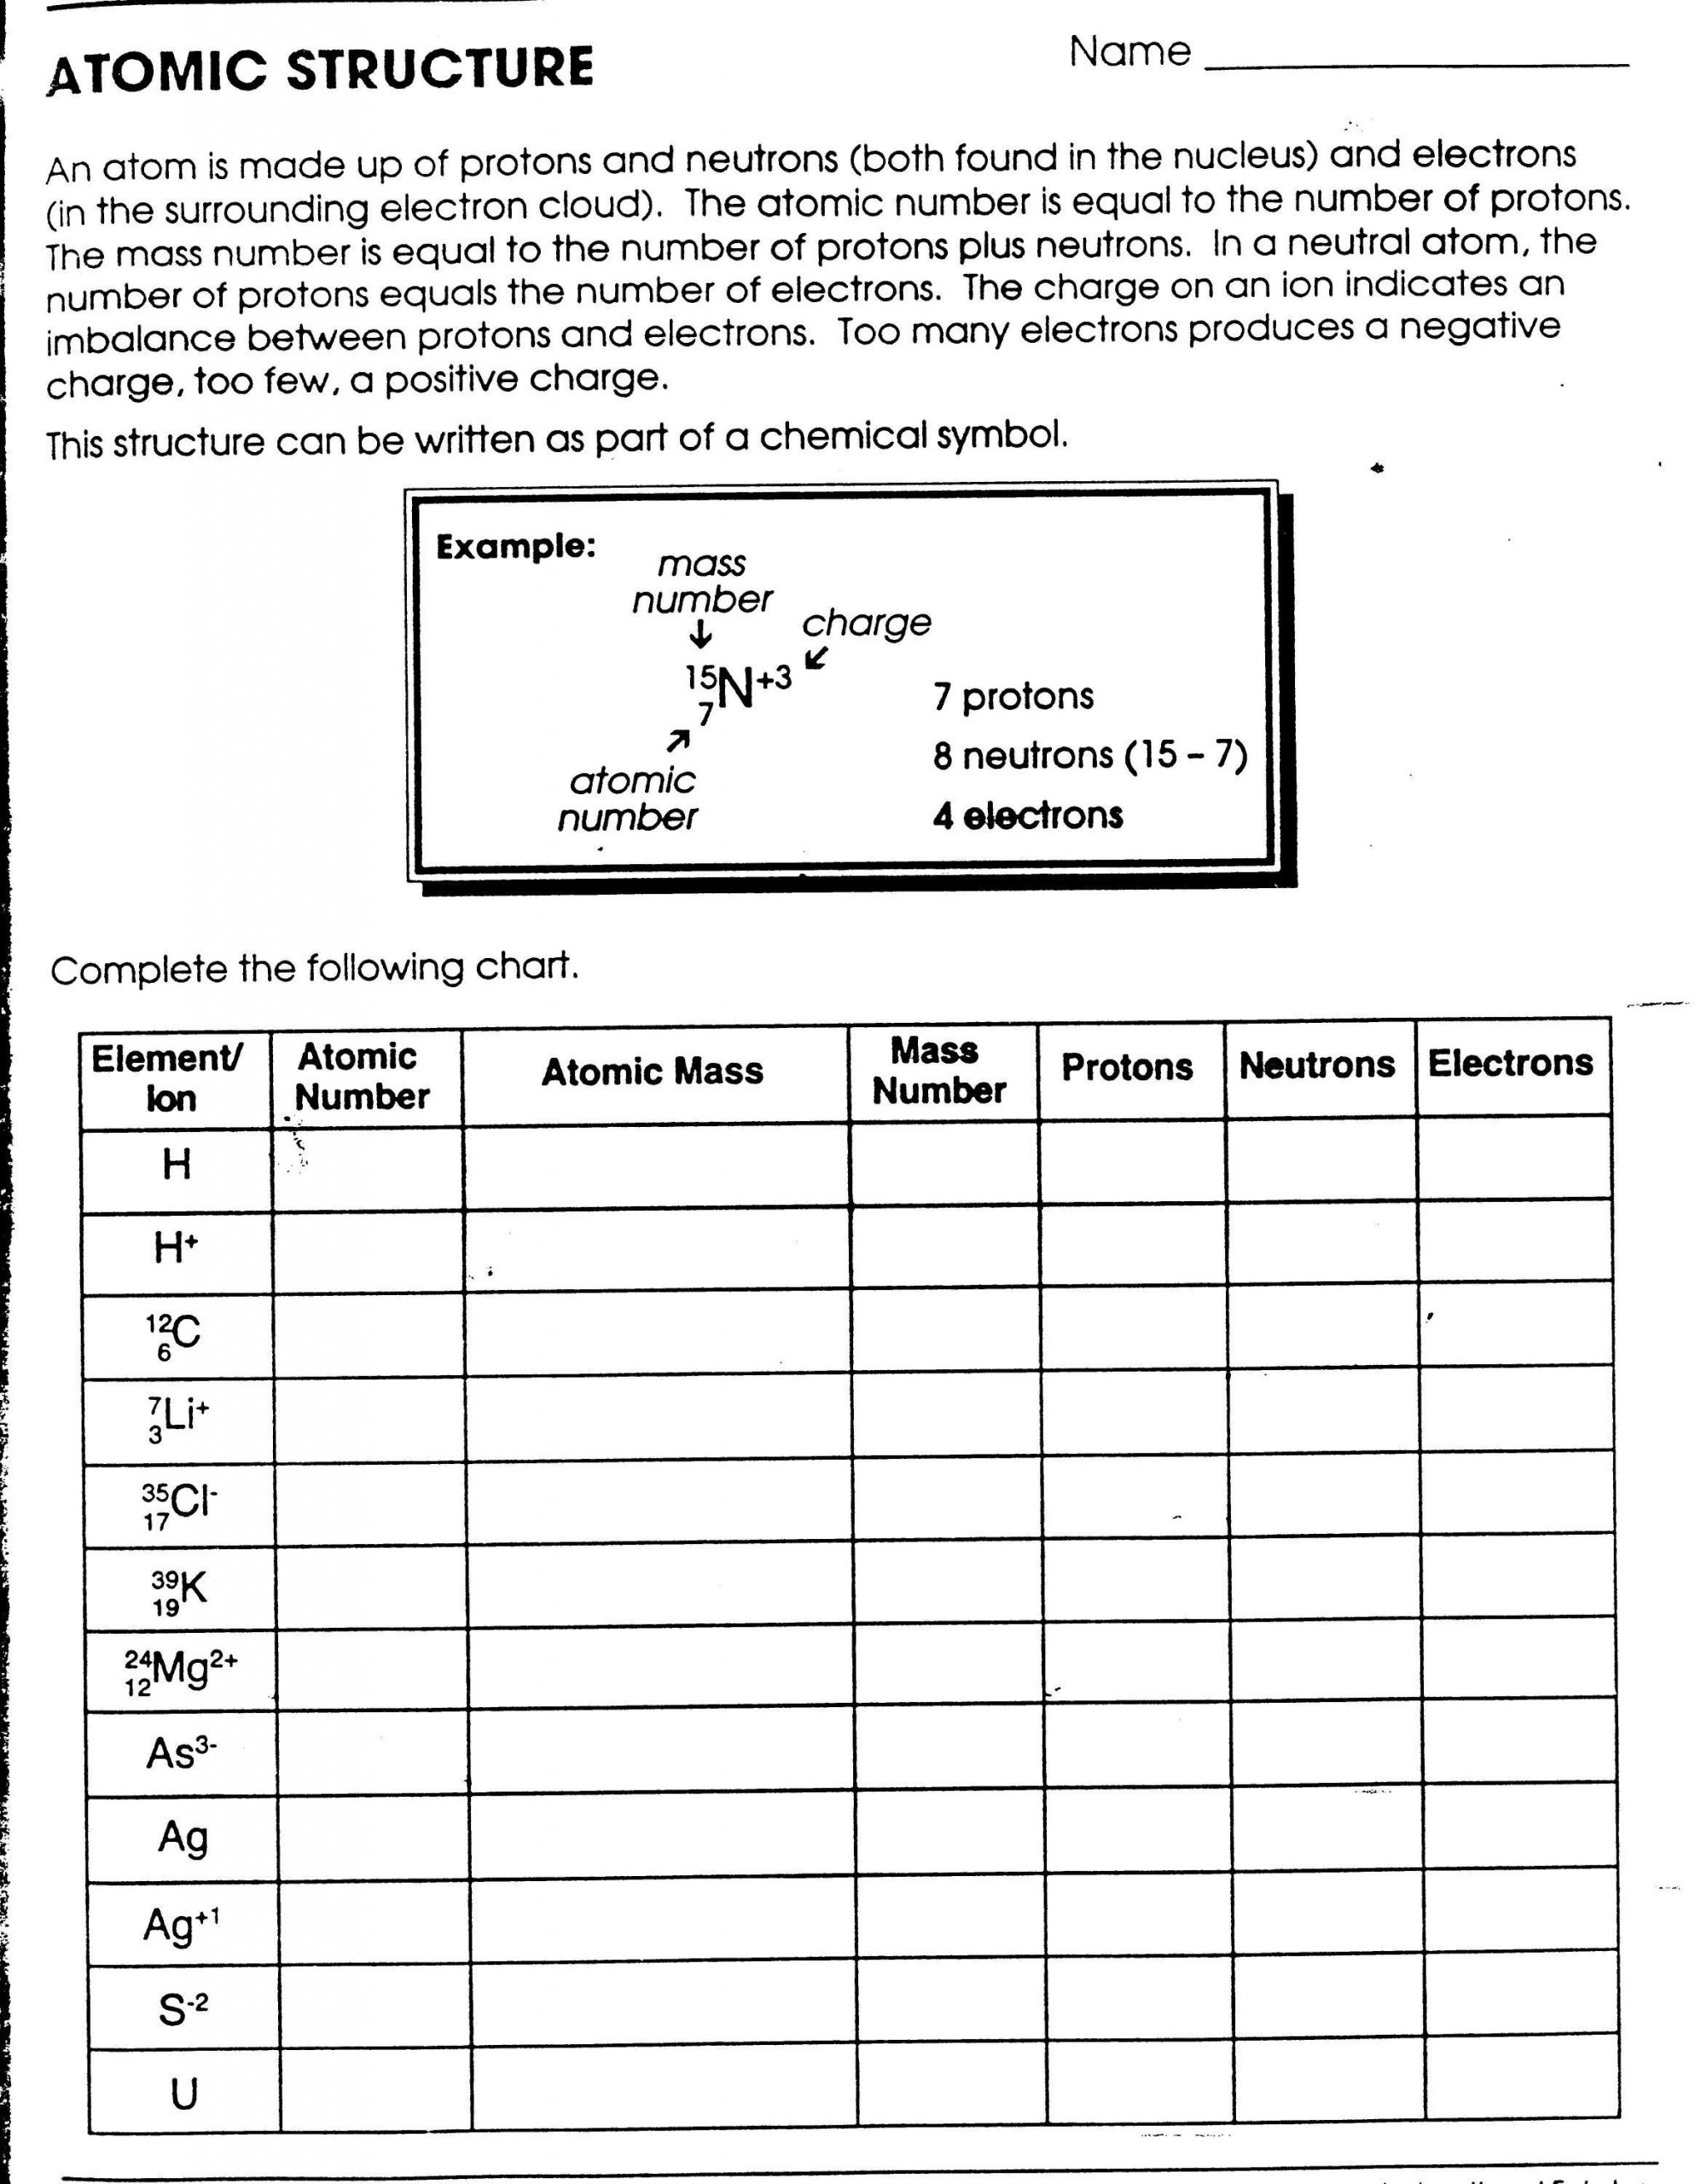 Atomic Structure Worksheet Answers Chemistry Printables atomic Structure Worksheet Gozoneguide